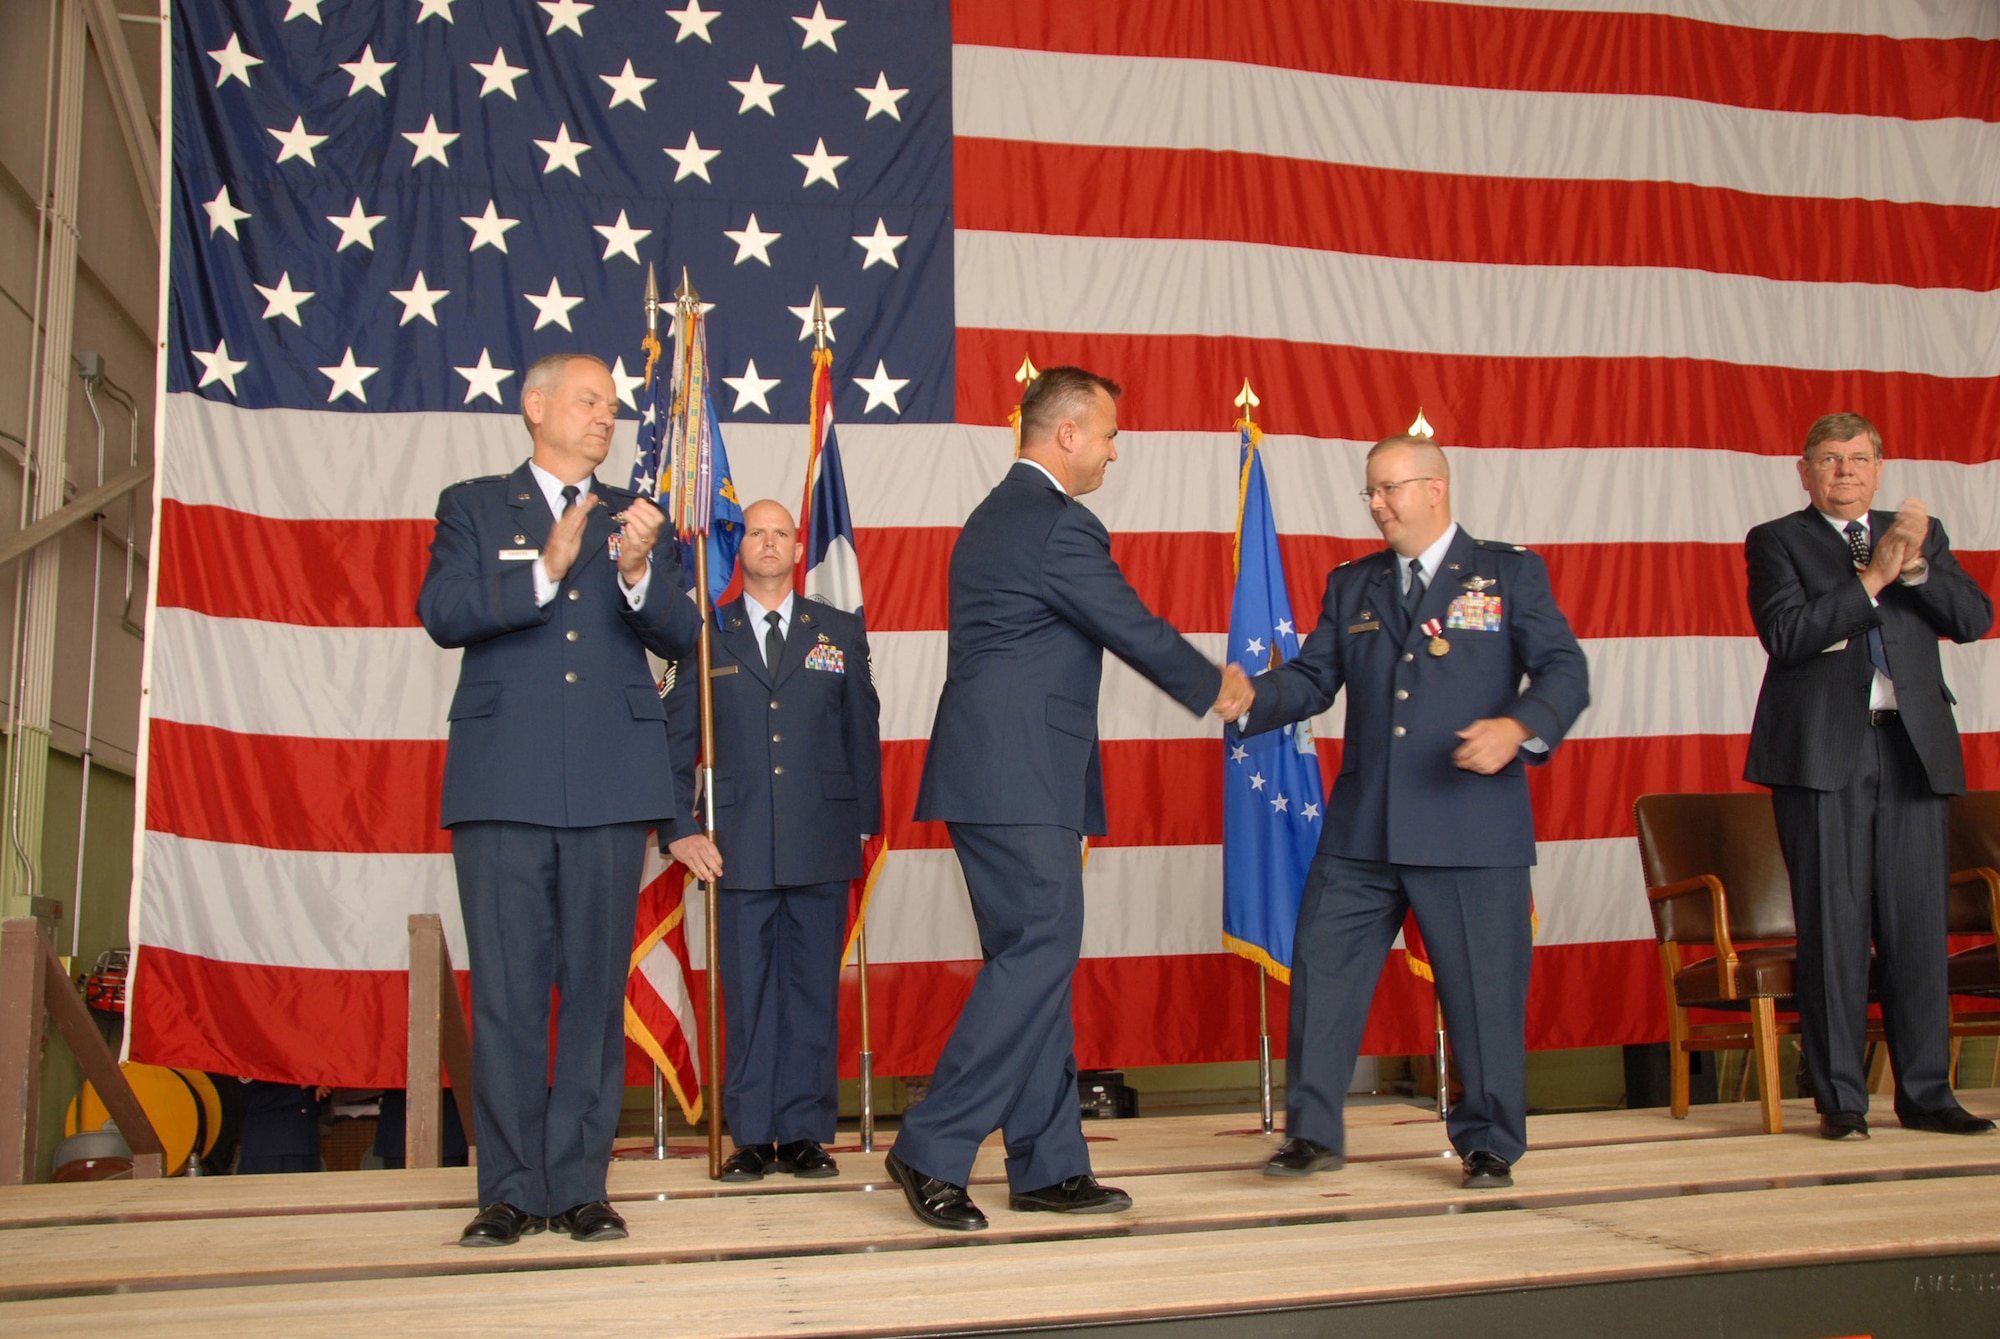 Lt. Col. Eric Mayheu and Lt. Col. Jeffrey Devore congratulate one another after Colonel Mayheu assumed command of the 30th Airlift Squadron, 153rd Airlift Wing, Wyoming ANG, on July 10. Col David Kasberg, 19th Operations Group commander, presided over the ceremony whose attendees included Wyoming governor Dave Freudenthal, civilain and military officials, as well as members of the Wyoming ANG. (U.S. Air Force photo by Senior Master Sgt. Paul Mann)